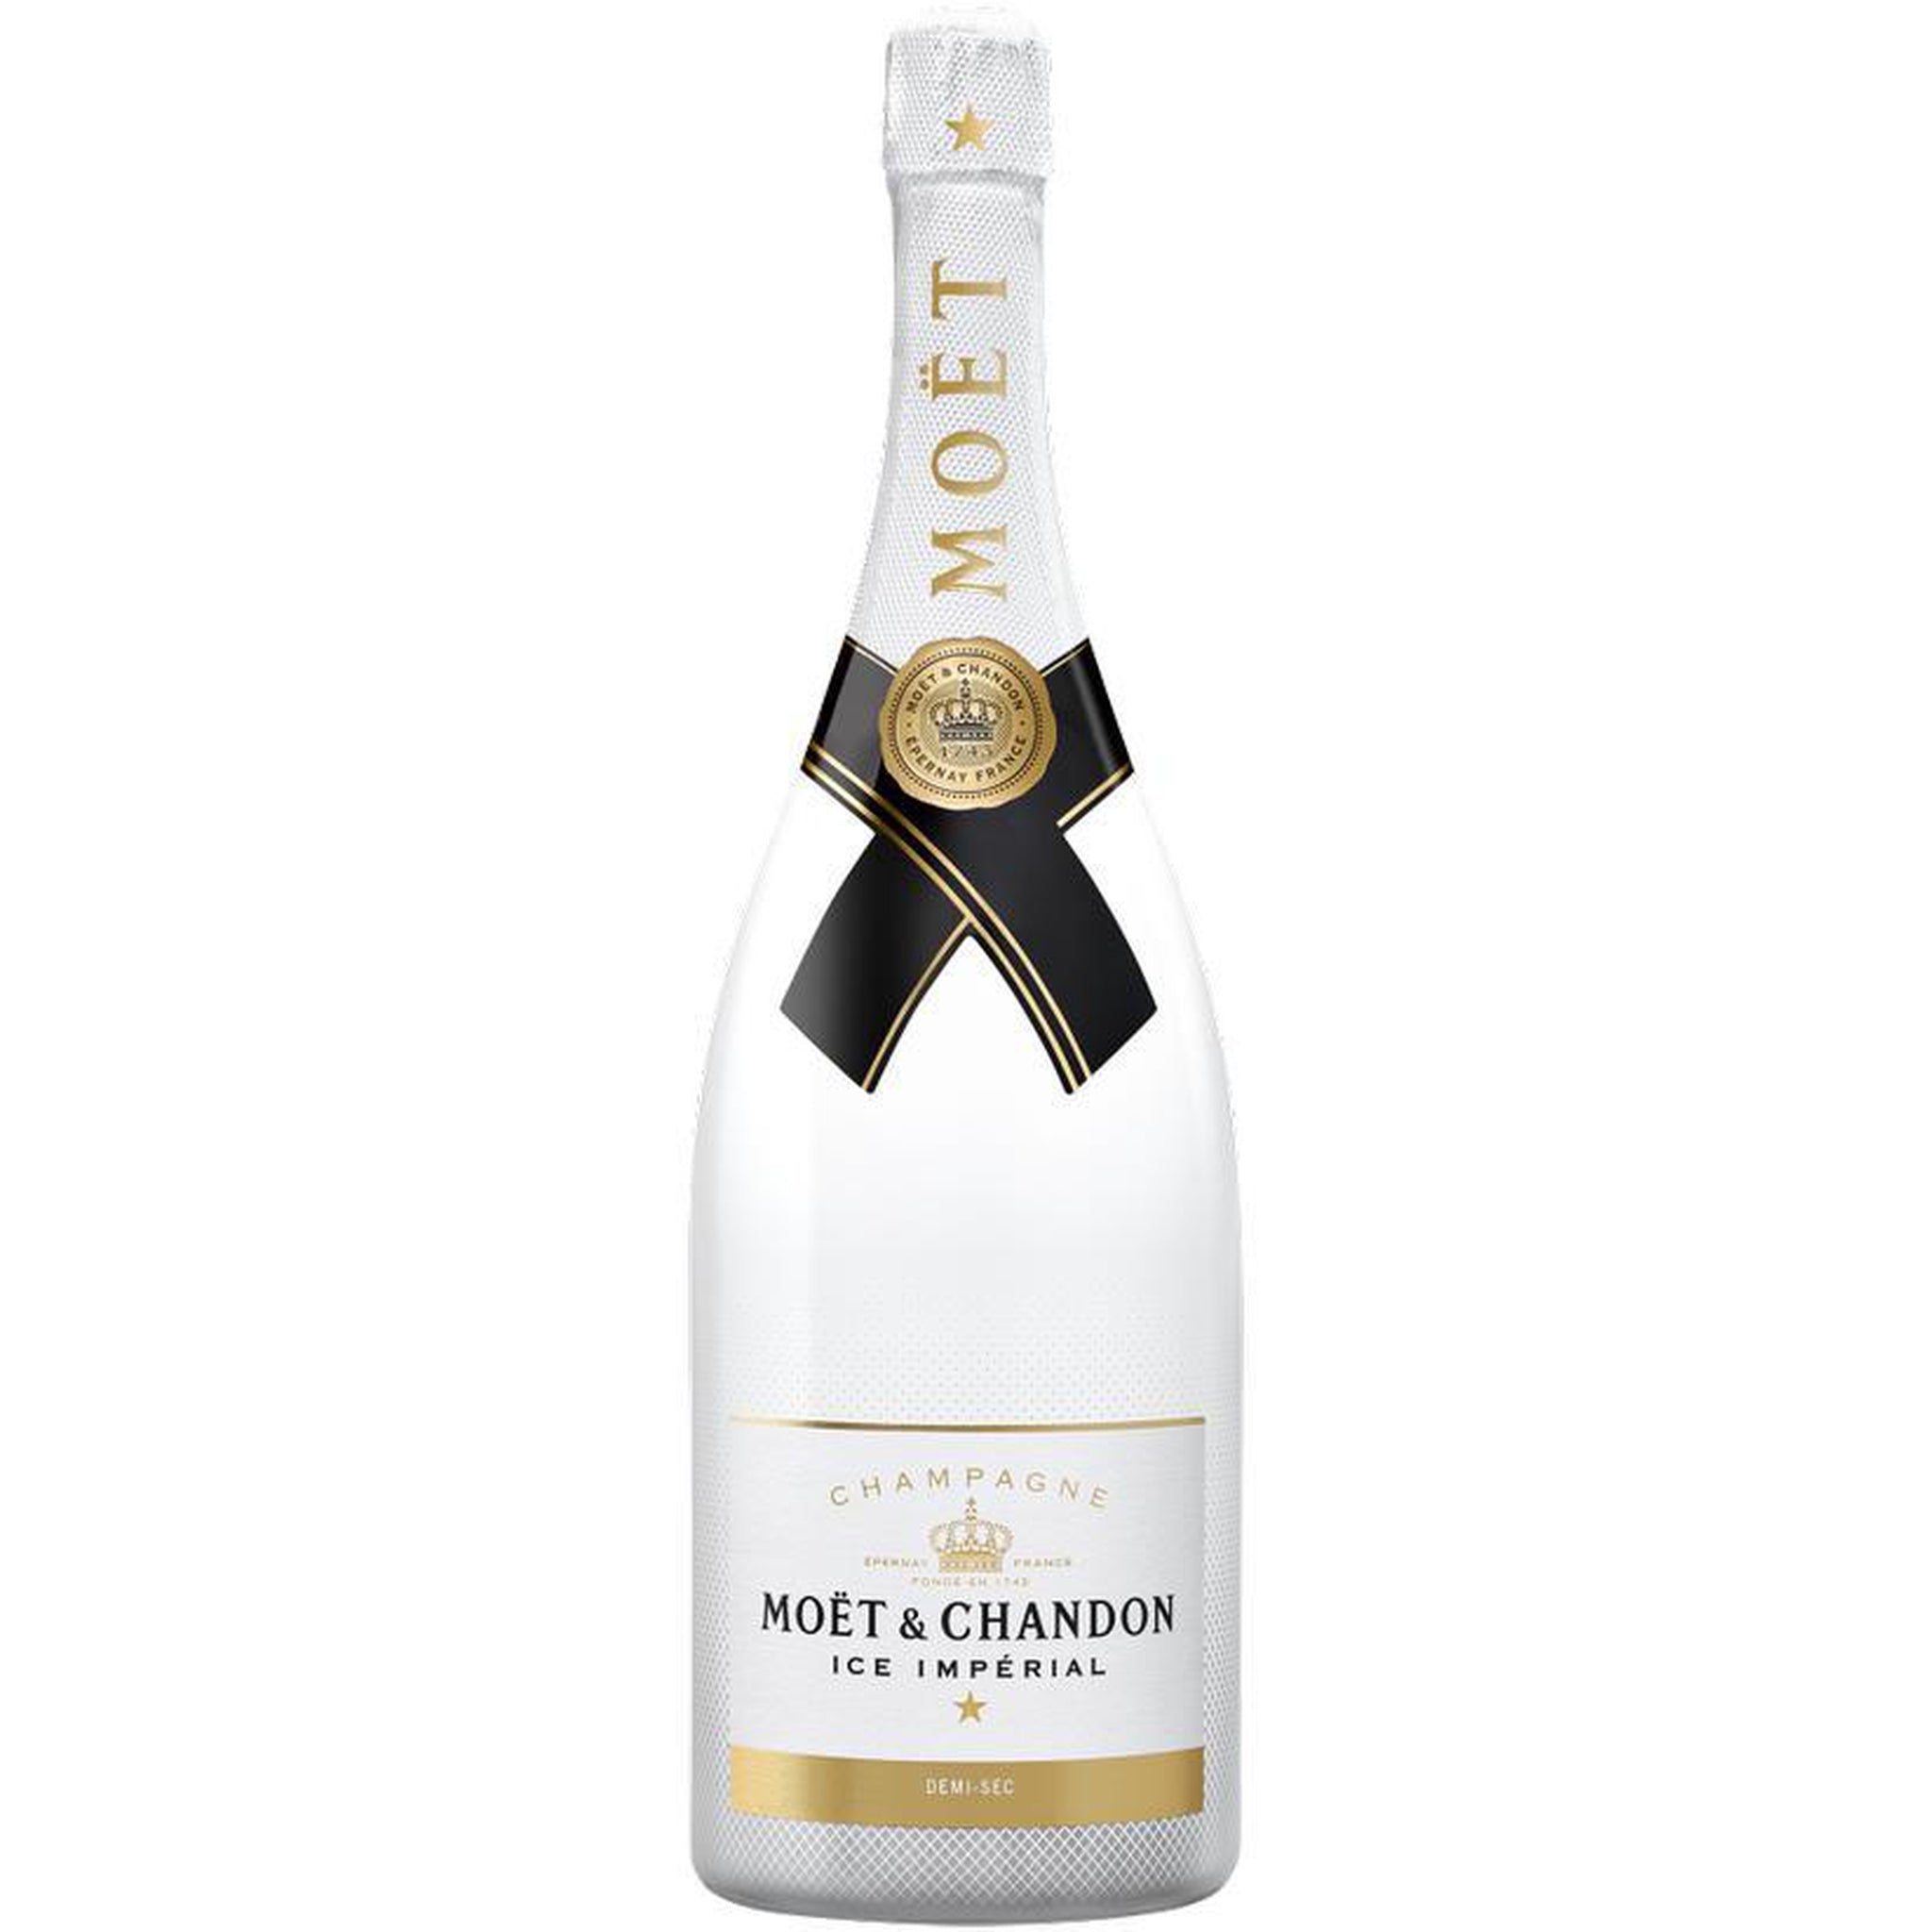 Mr. Booze.dk Moët & Chandon Champagne Ice Imperial (MG) (150 cl.)